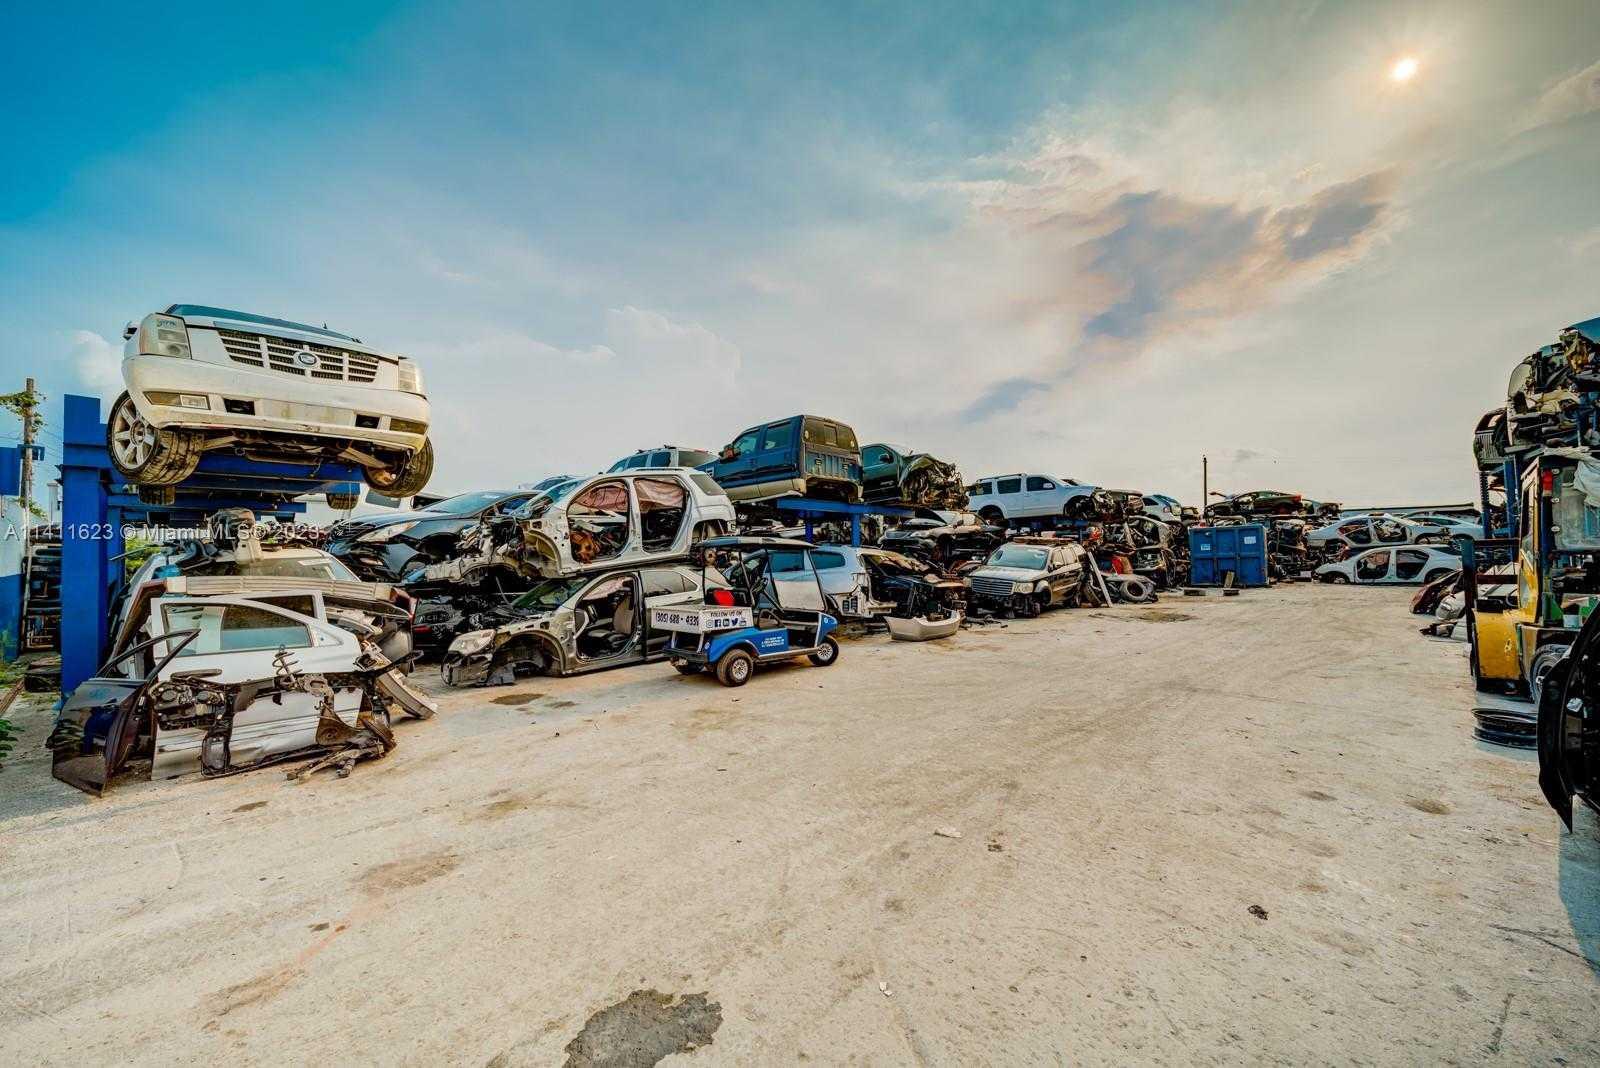 2 2 Junkyards For Sale in South Florida with Real Estate Included, Unincorporated Dade County, Automotive,  for sale, Sandra Benkahla, The 305 Agency